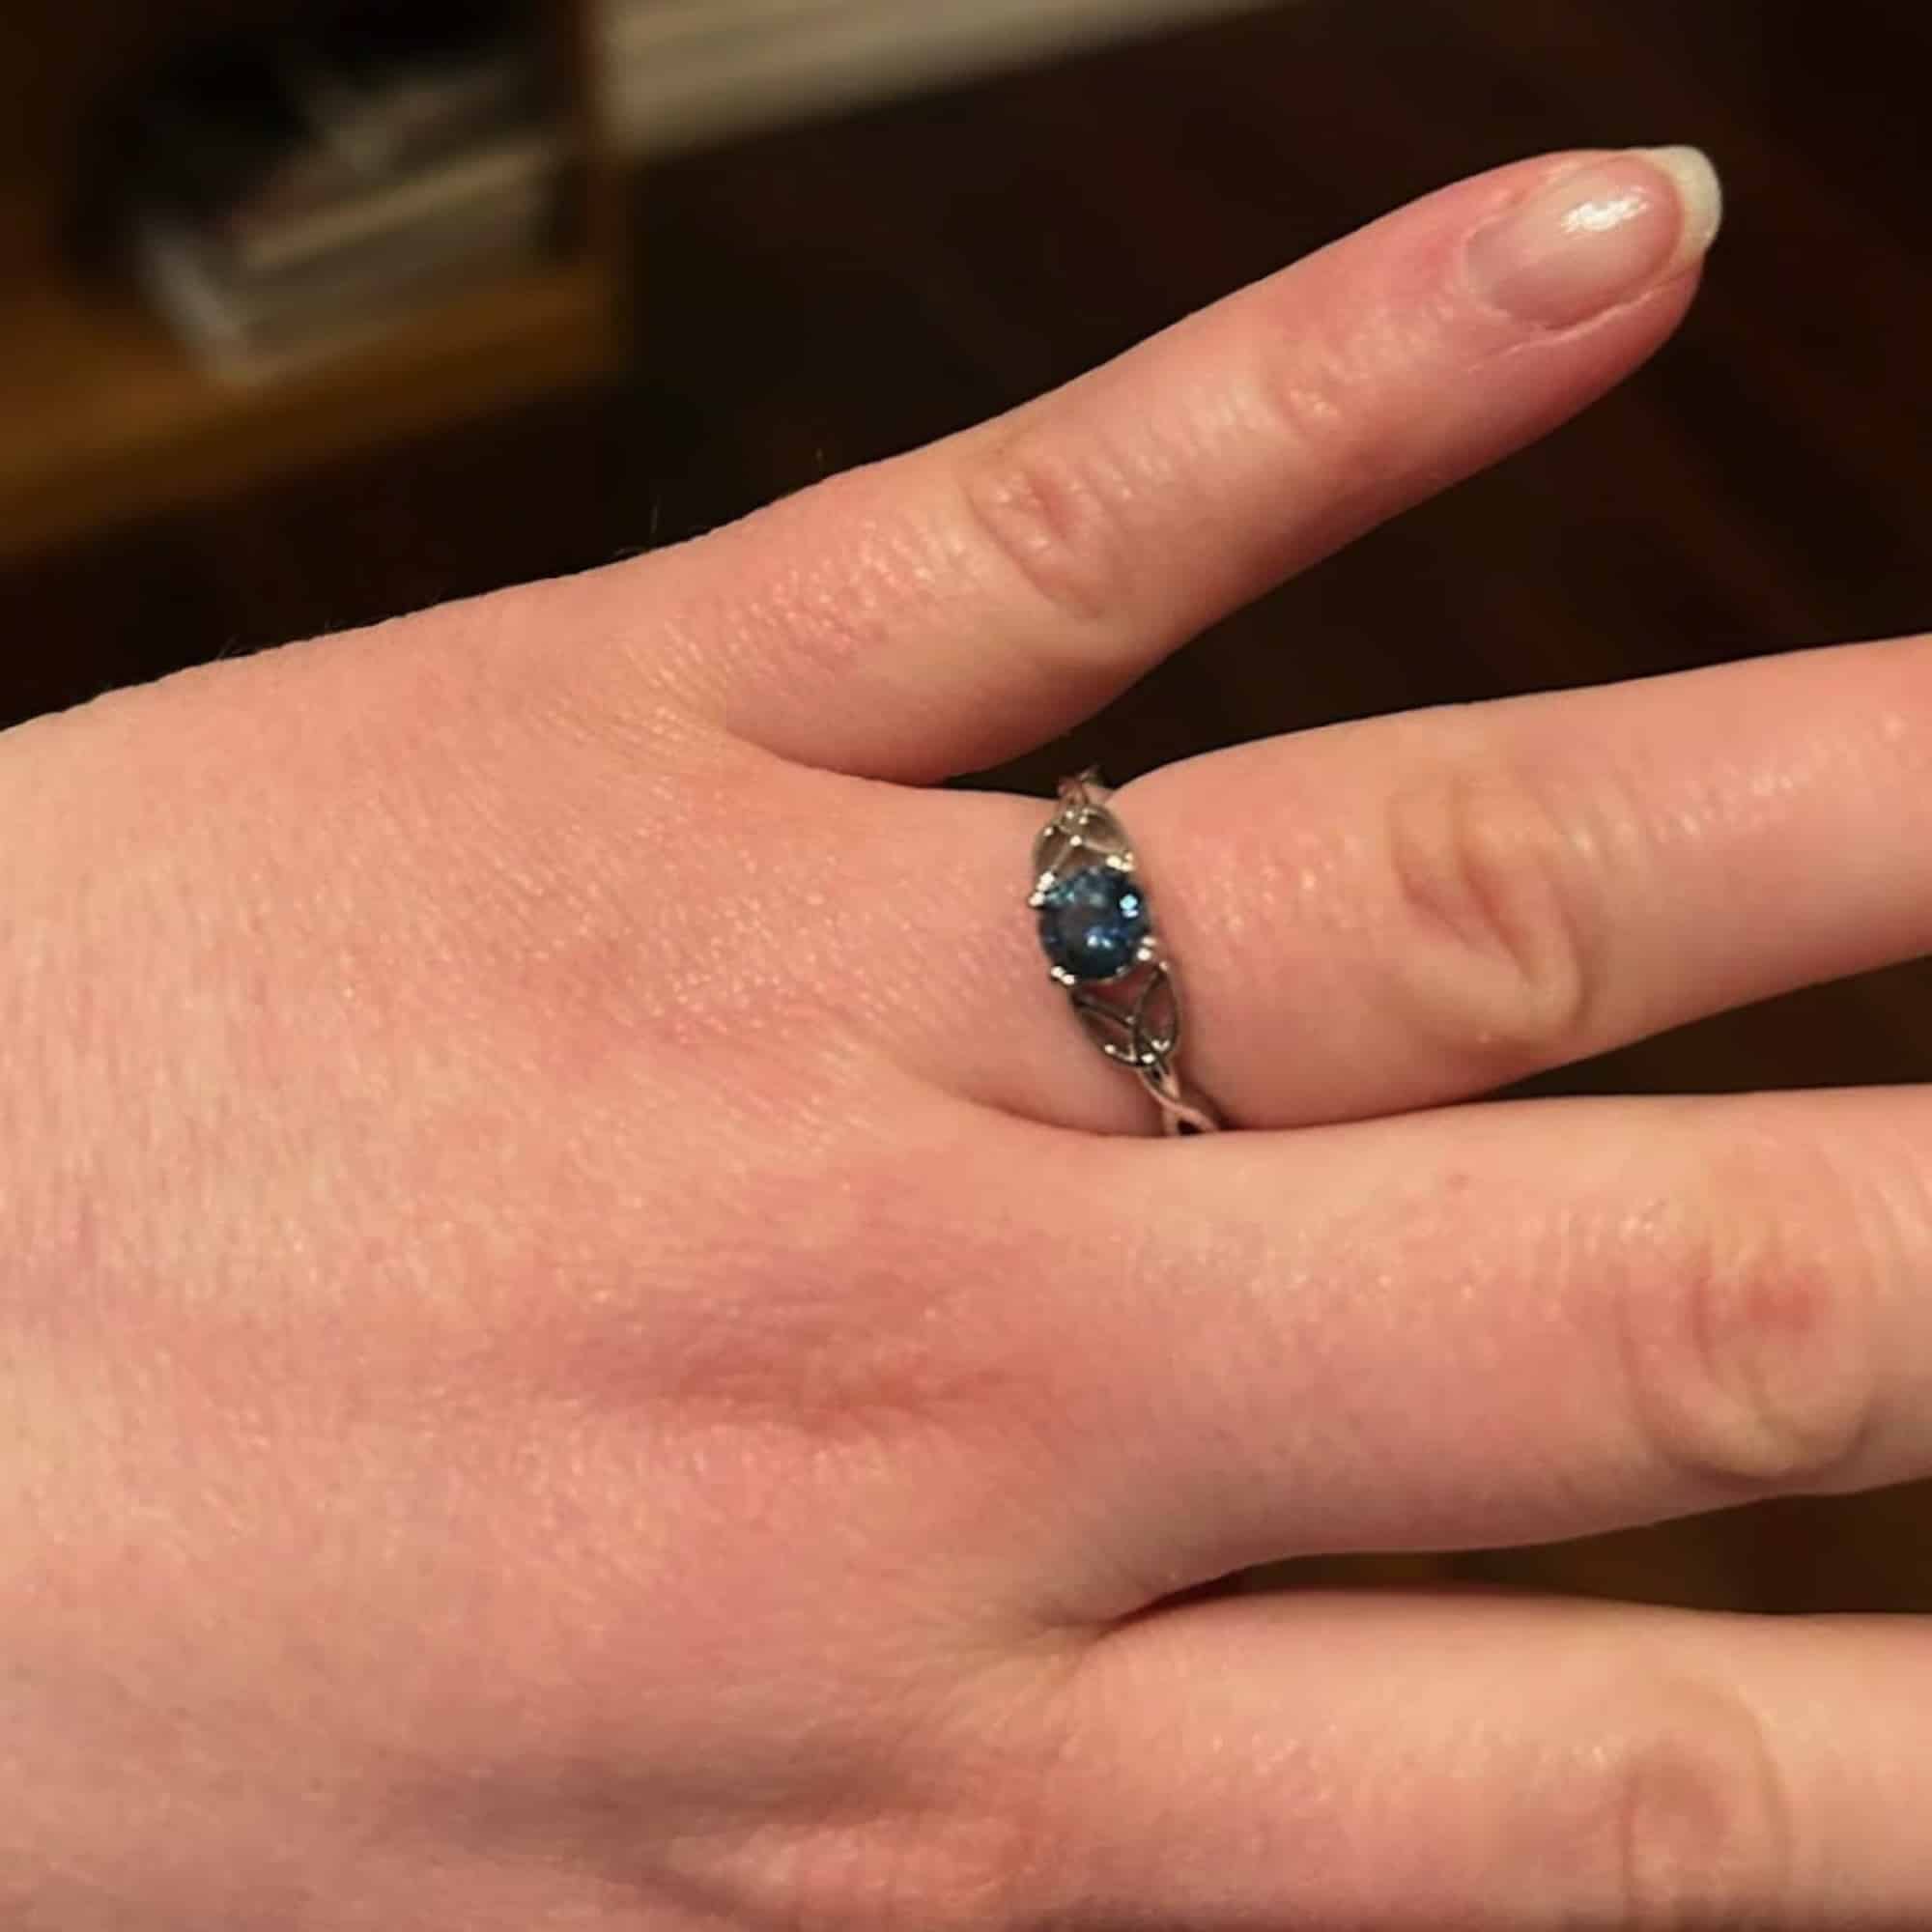 A photo from a customer review featuring a white gold "Saoirse" ring with a round blue Montana sapphire